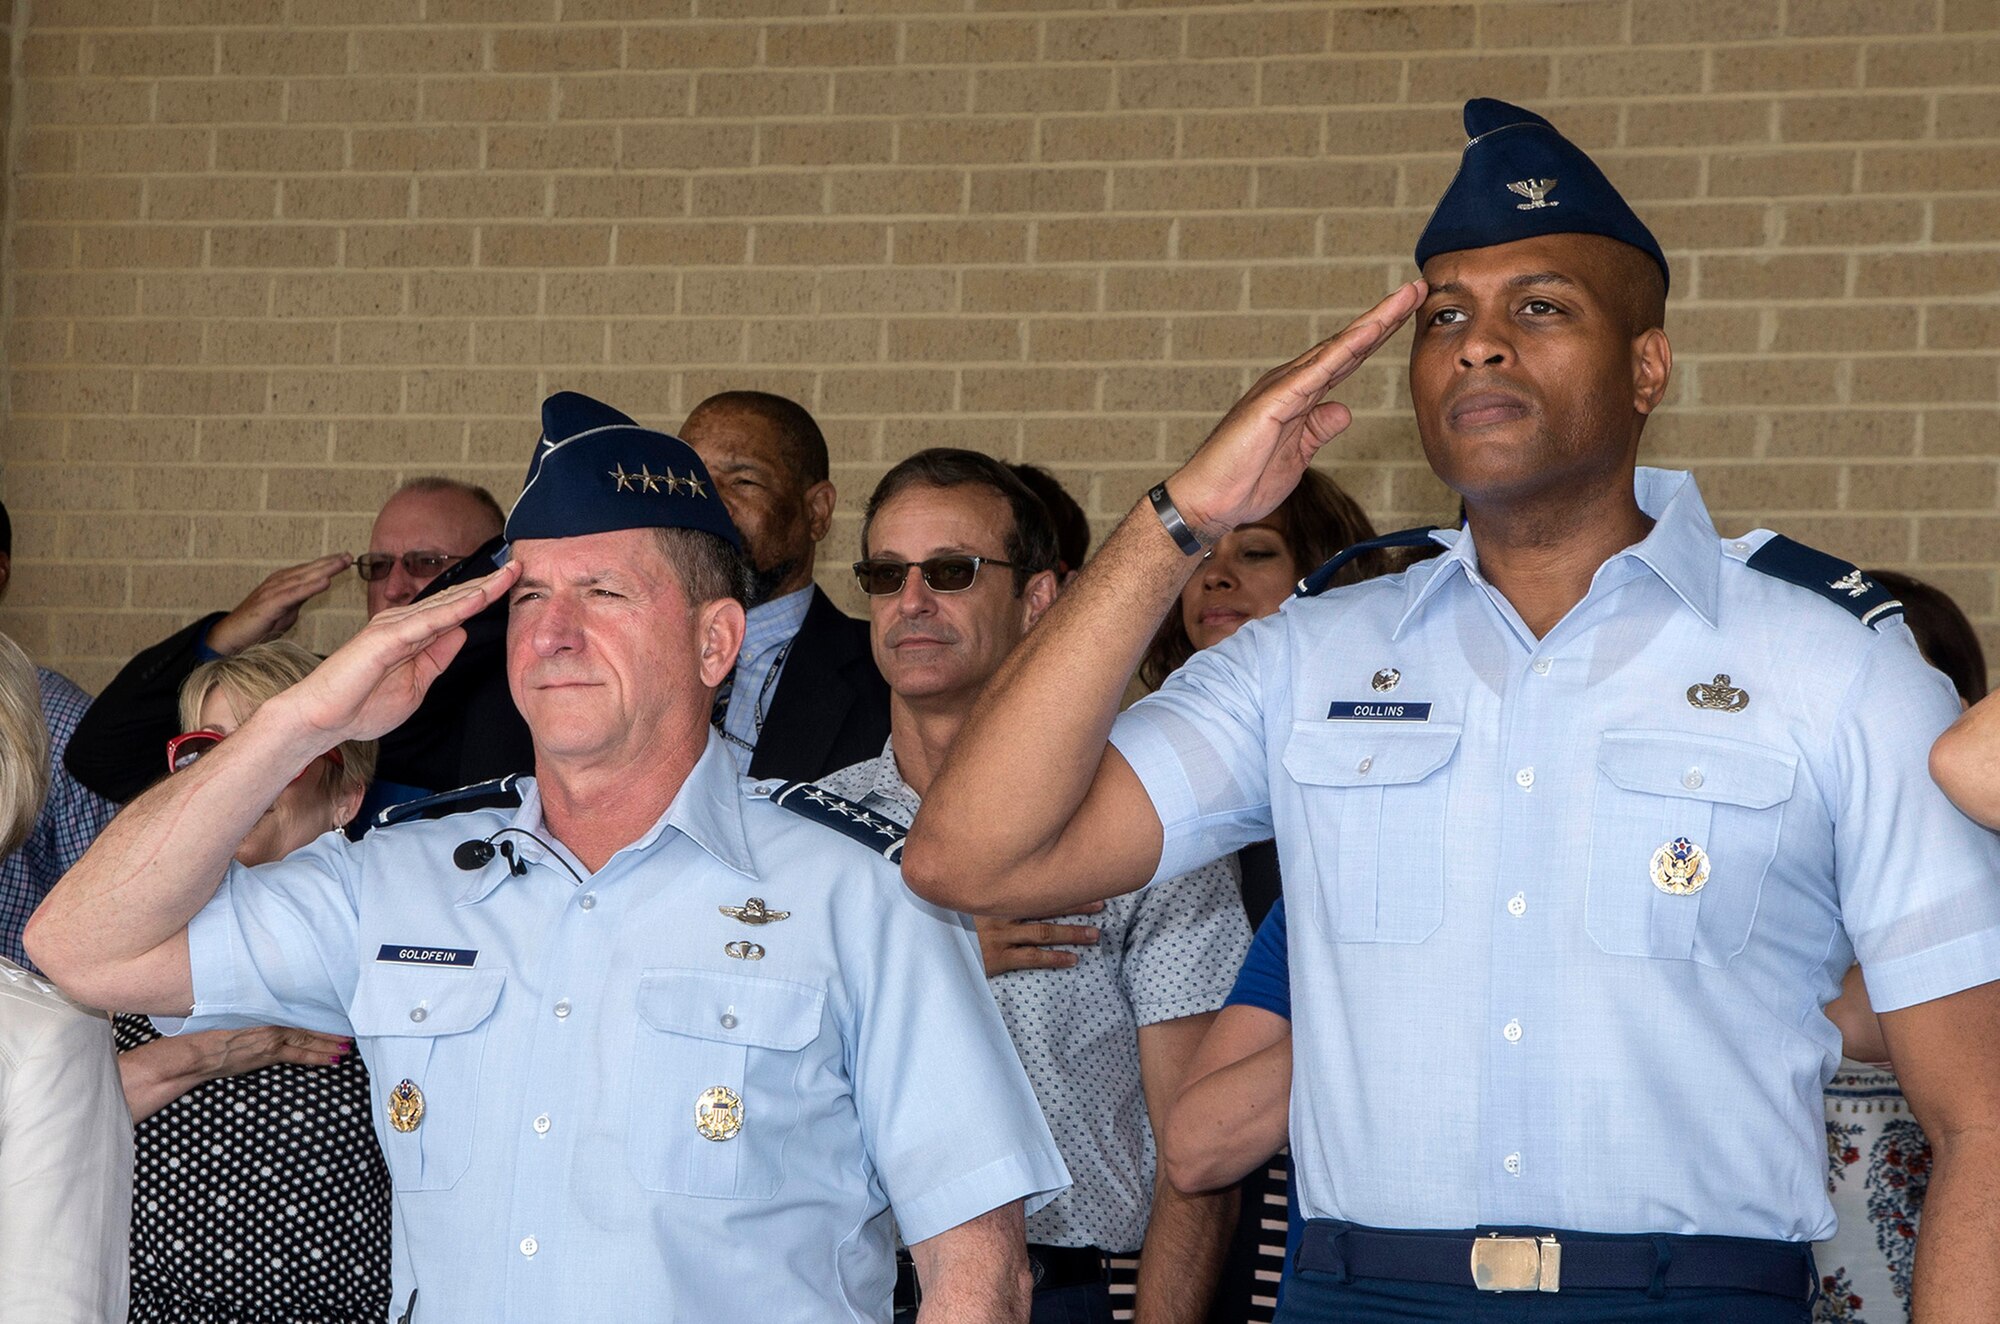 Air Force Chief of Staff Gen. David Goldfein and Col. Roy Collins, 37th Training Wing commander, salute during the playing of the national anthem as part of a basic military training graduation June 16, 2017, at Joint Base San Antonio-Lackland. Goldfein toured various JBSA-Lackland facilities and met many 37th Training Wing Airmen during his two-day visit. Every enlisted Airmen begins their Air Force career at basic military training. JBSA-Lackland is often referred to as the "Gateway to the Air Force," graduating about 39,000 Airmen annually. Basic military training is one of the missions of the 37th Training Wing, the largest training wing in the United States Air Force. (U.S. Air Force photo by Johnny Saldivar)